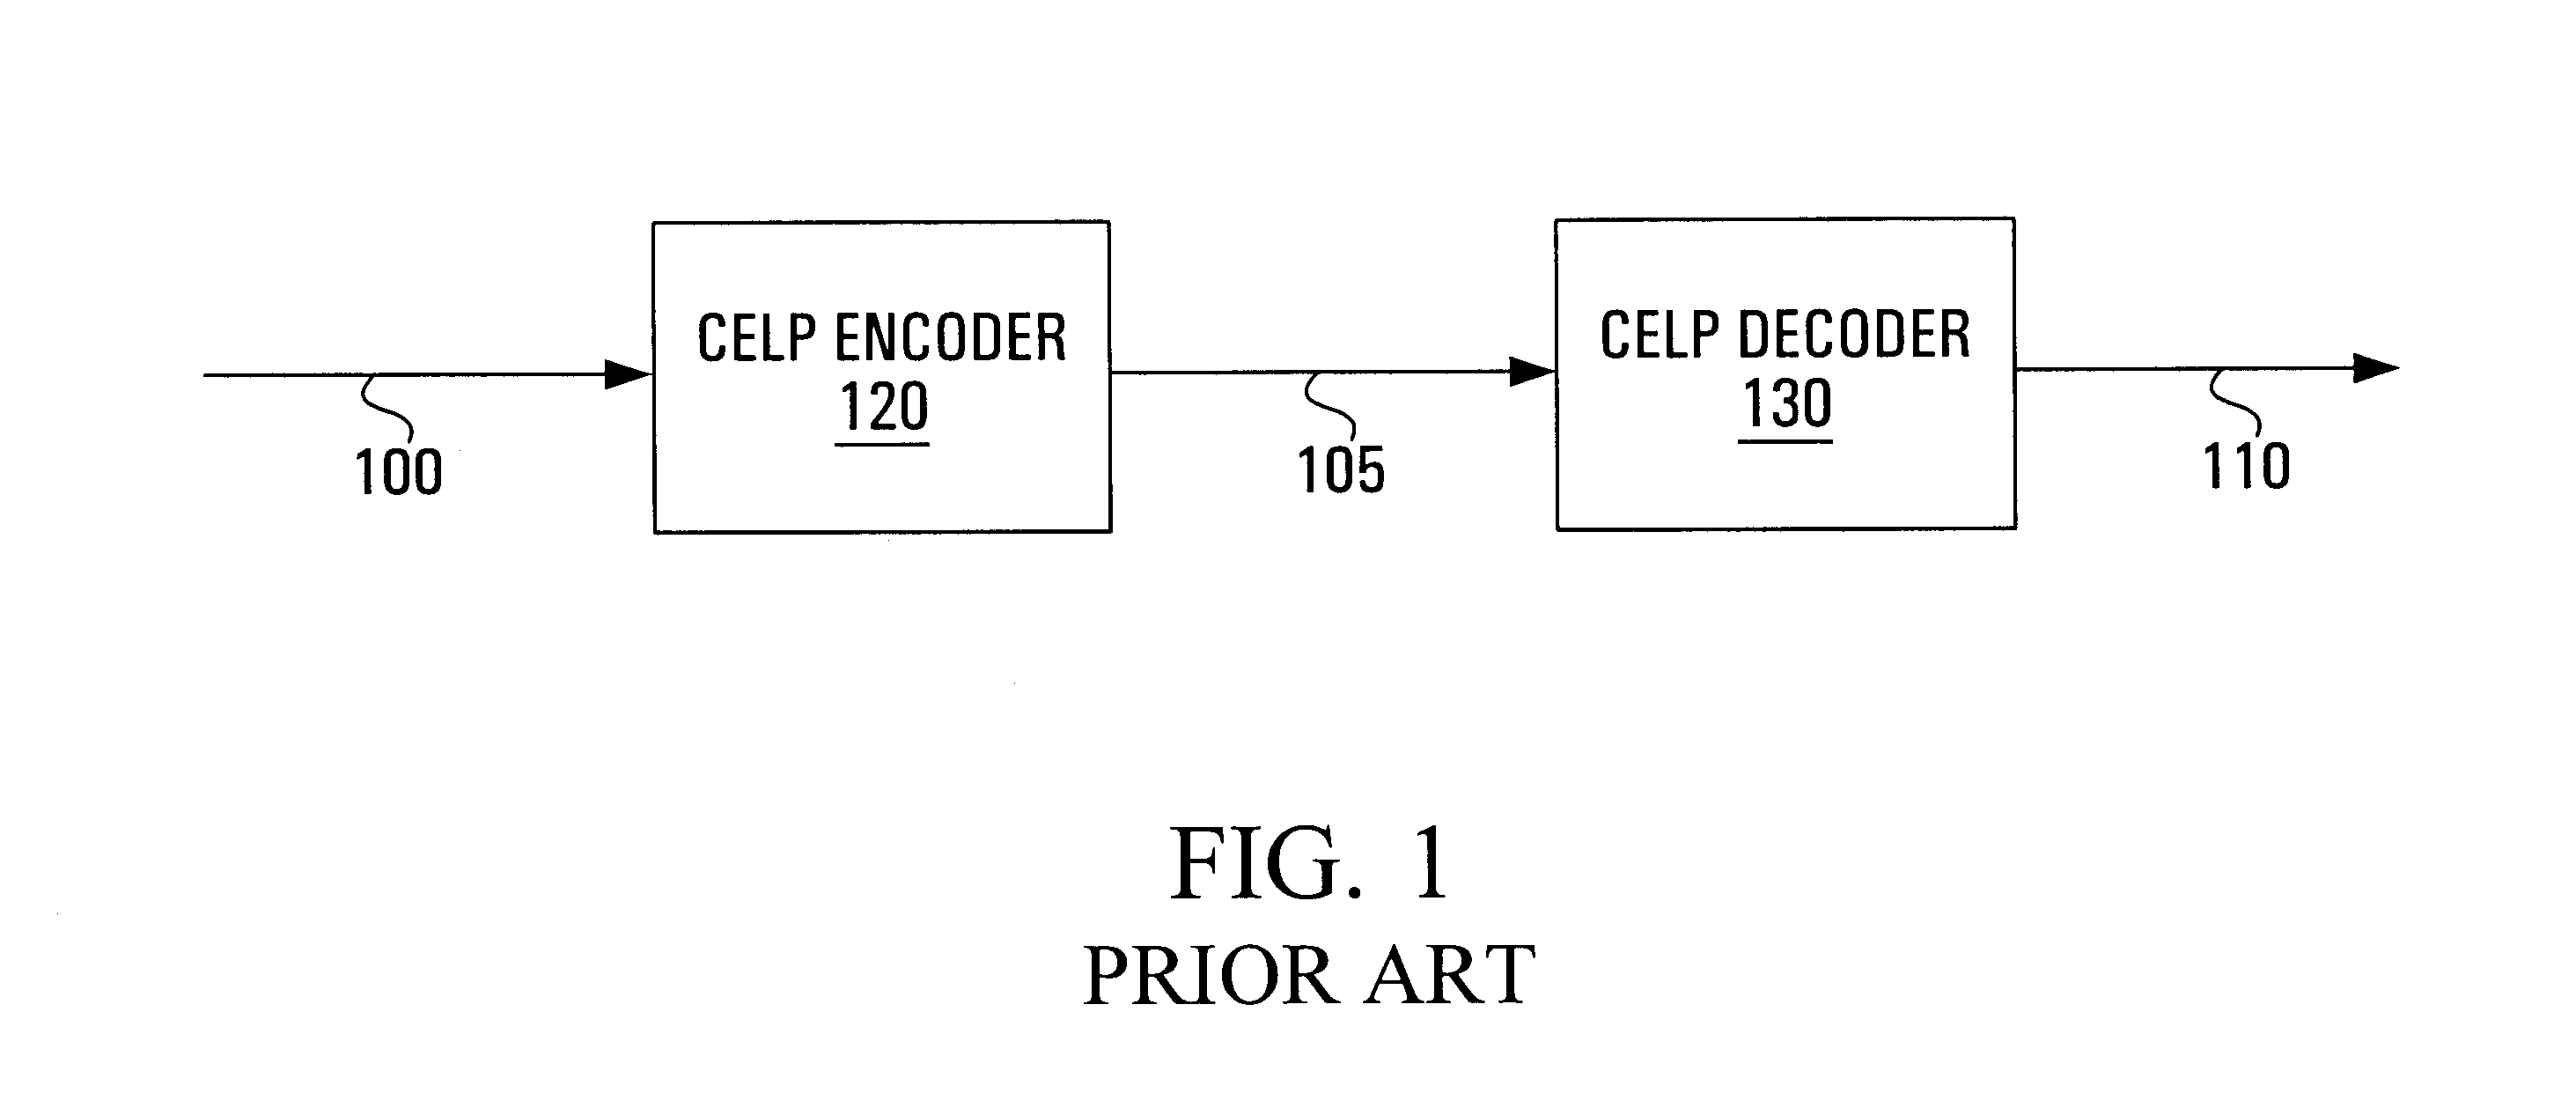 Apparatus and method for coding speech signals by making use of voice/unvoiced characteristics of the speech signals